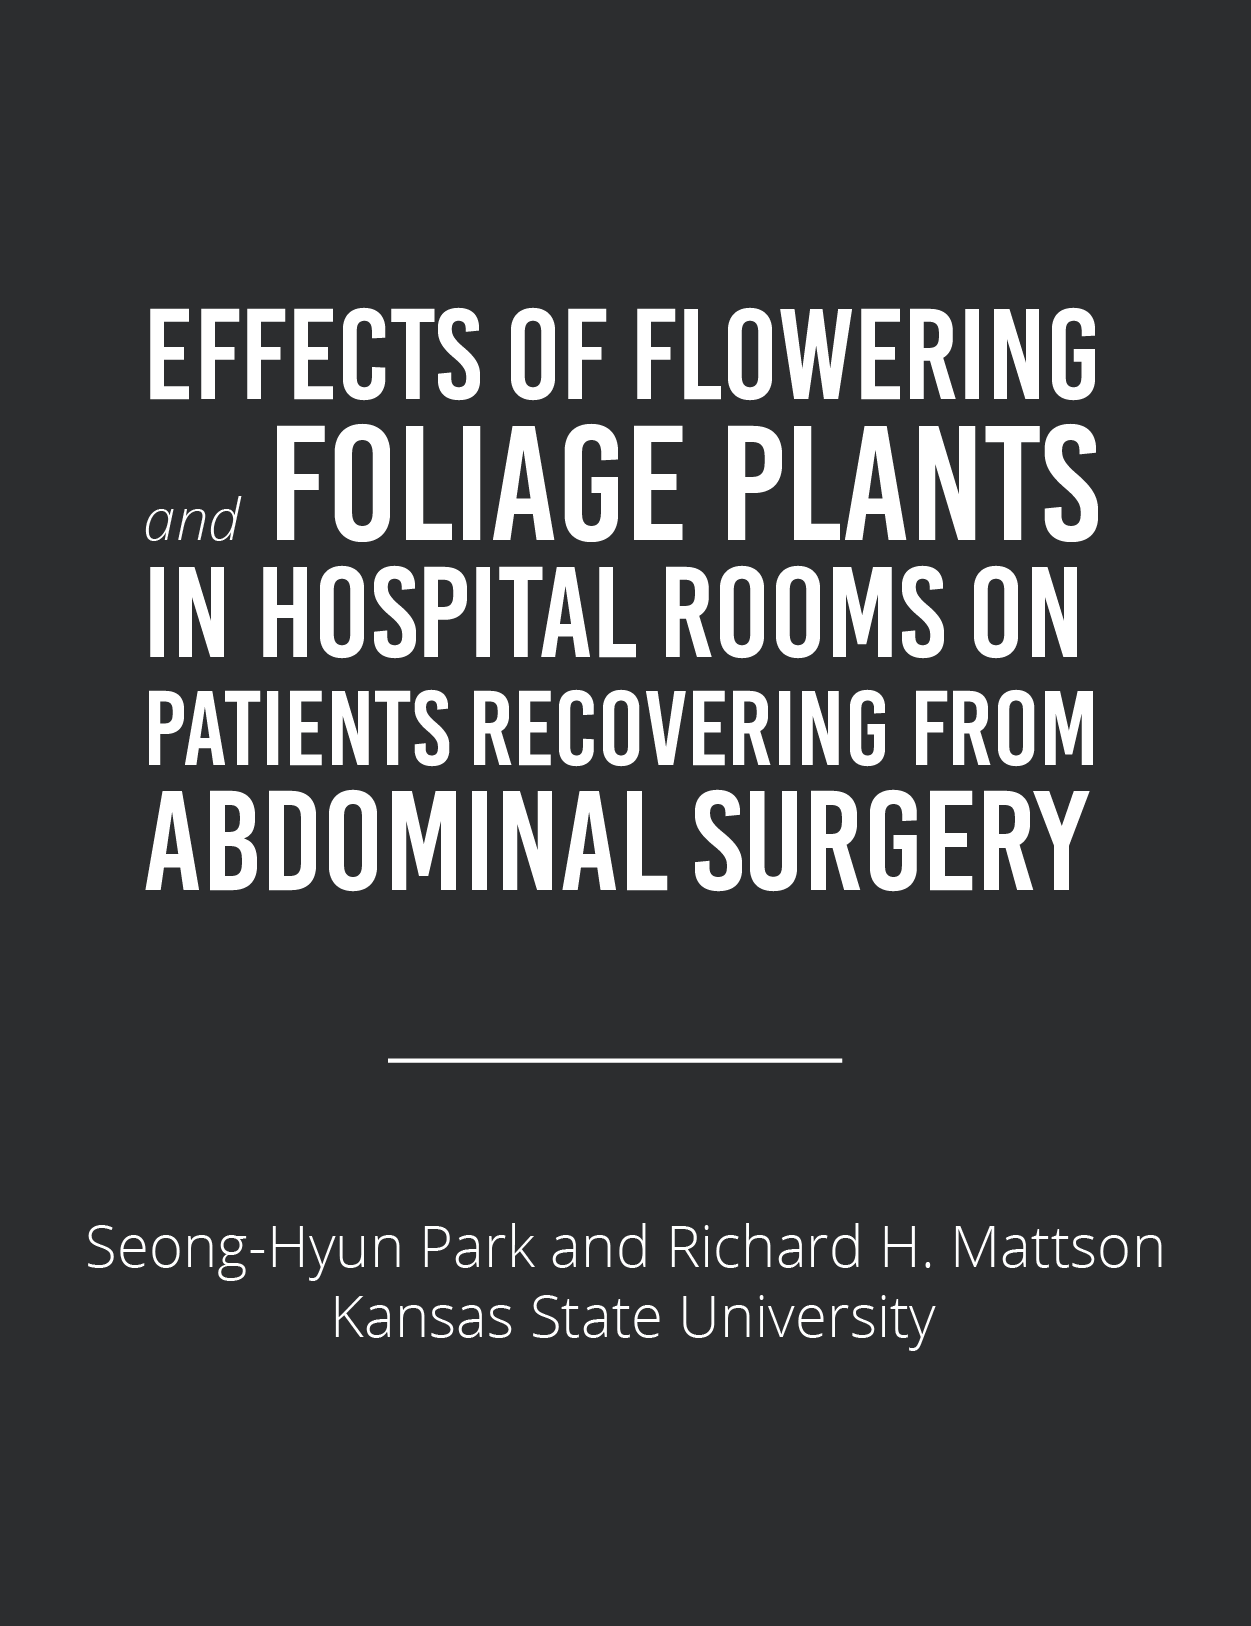 plants in hospital rooms